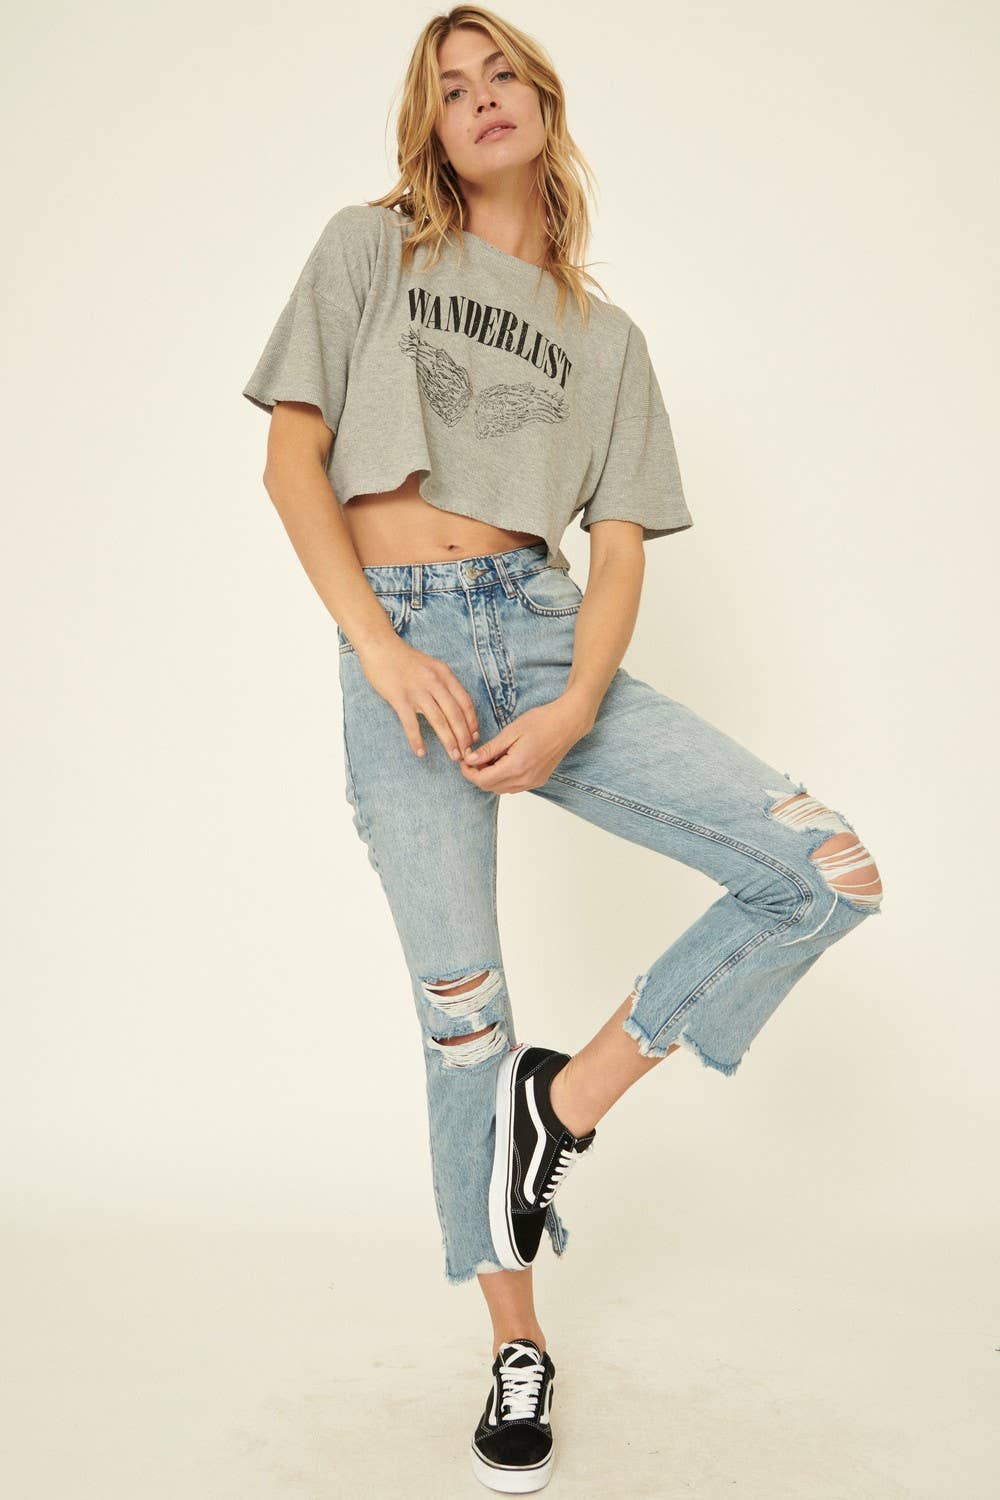 Sale Wanderlust Angel Distressed Cropped Graphic Tee